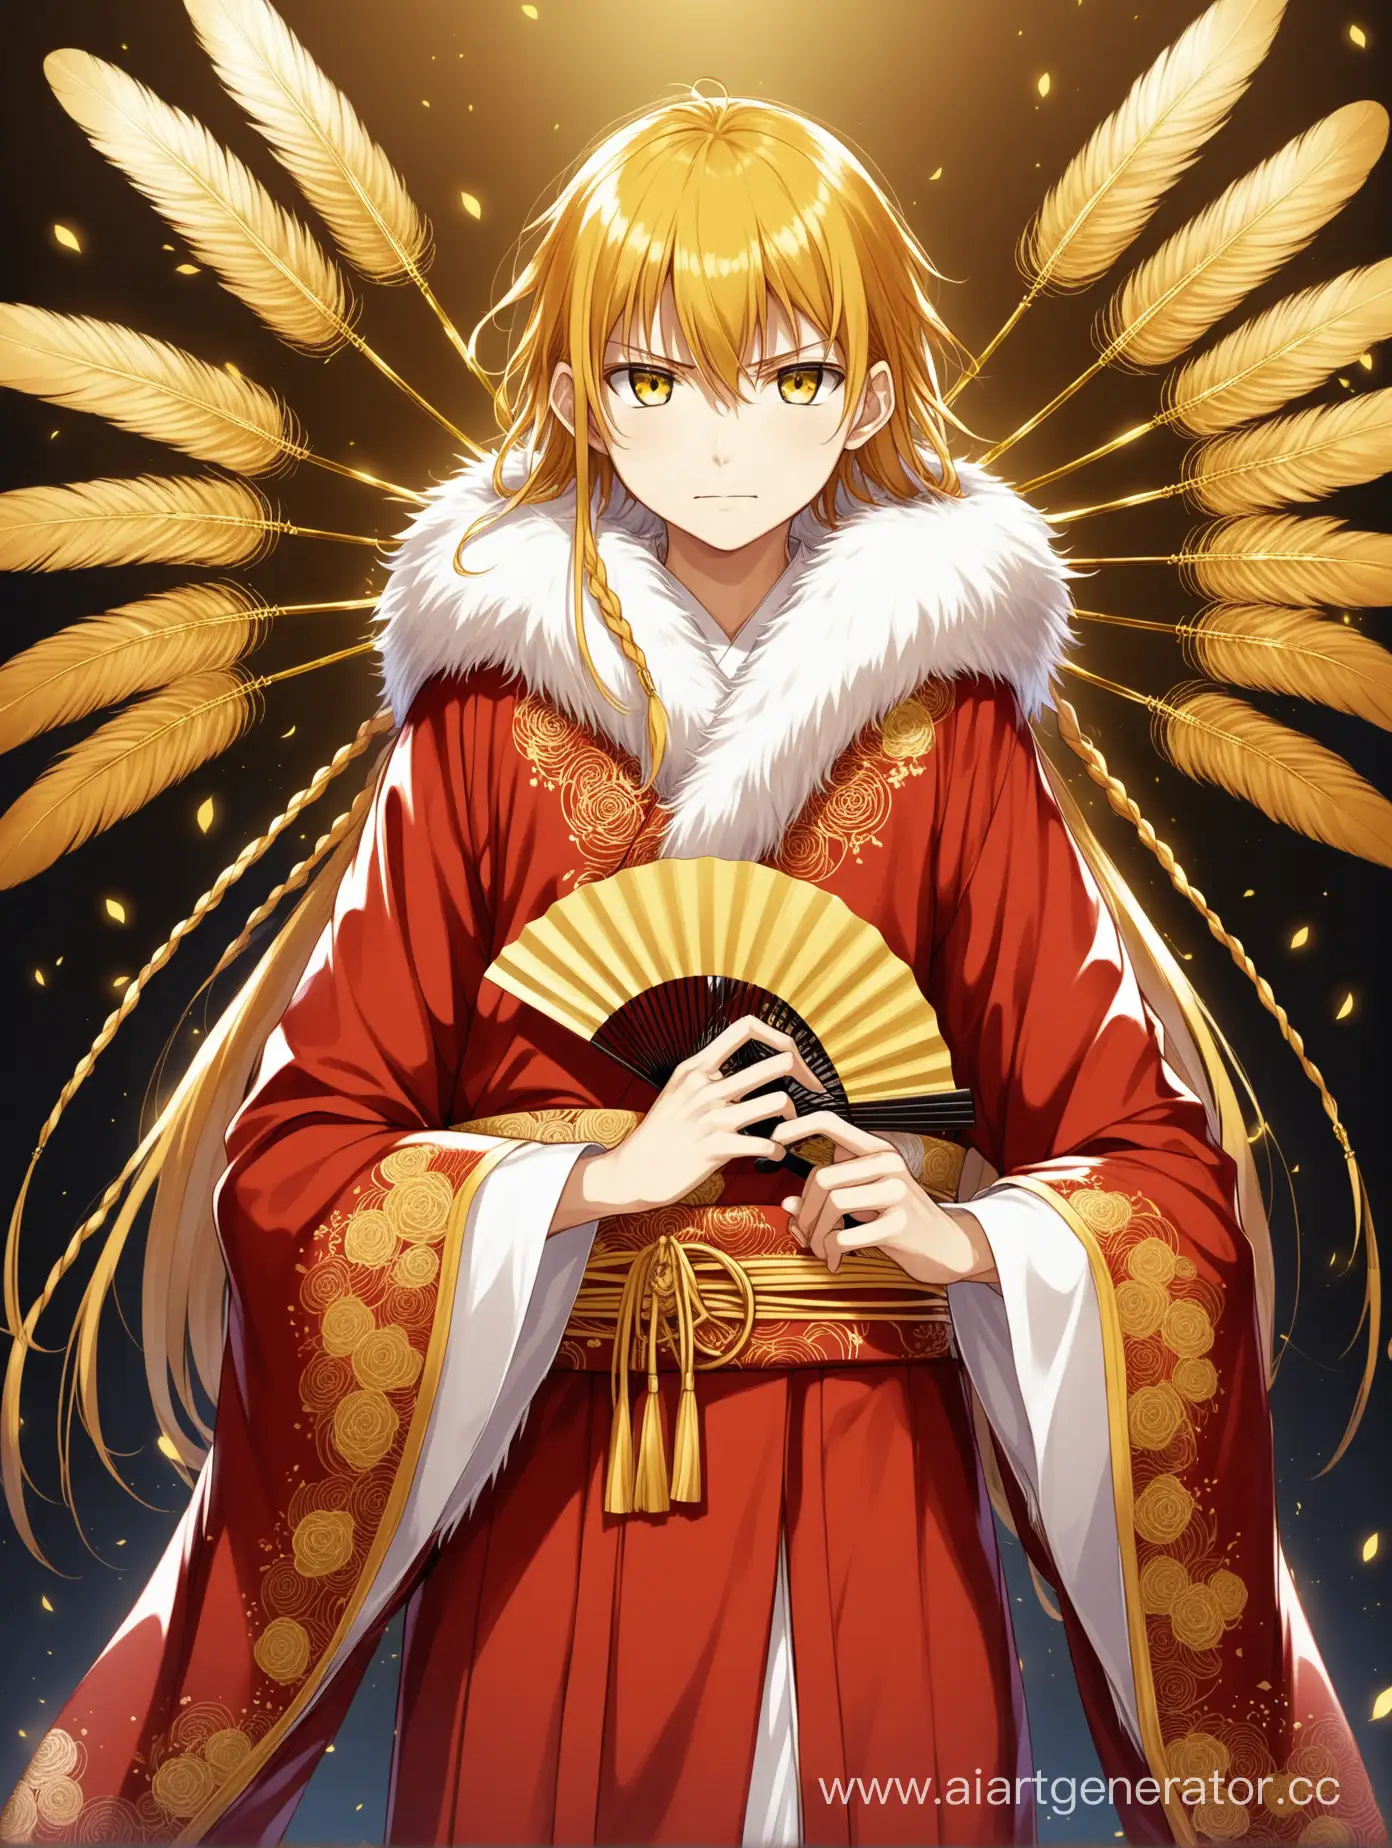 Young-Handsome-Teenage-Boy-in-Red-Kimono-with-Gold-Embroidery-and-Fan